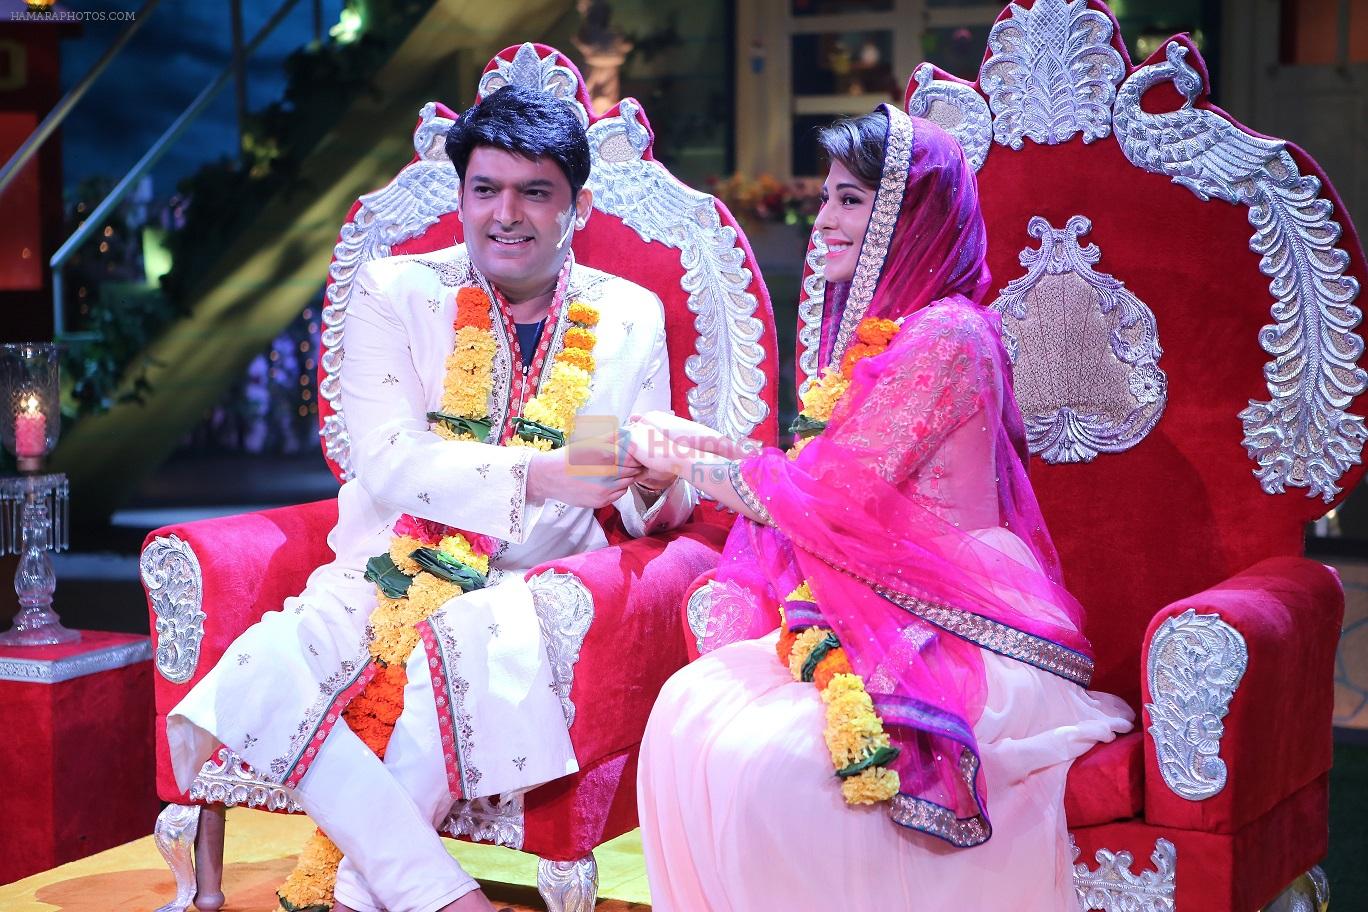 Kapil Sharma and Jacqueline Fernandez tie the knot on the sets of The Kapil Sharma Show on 10th Aug 2016